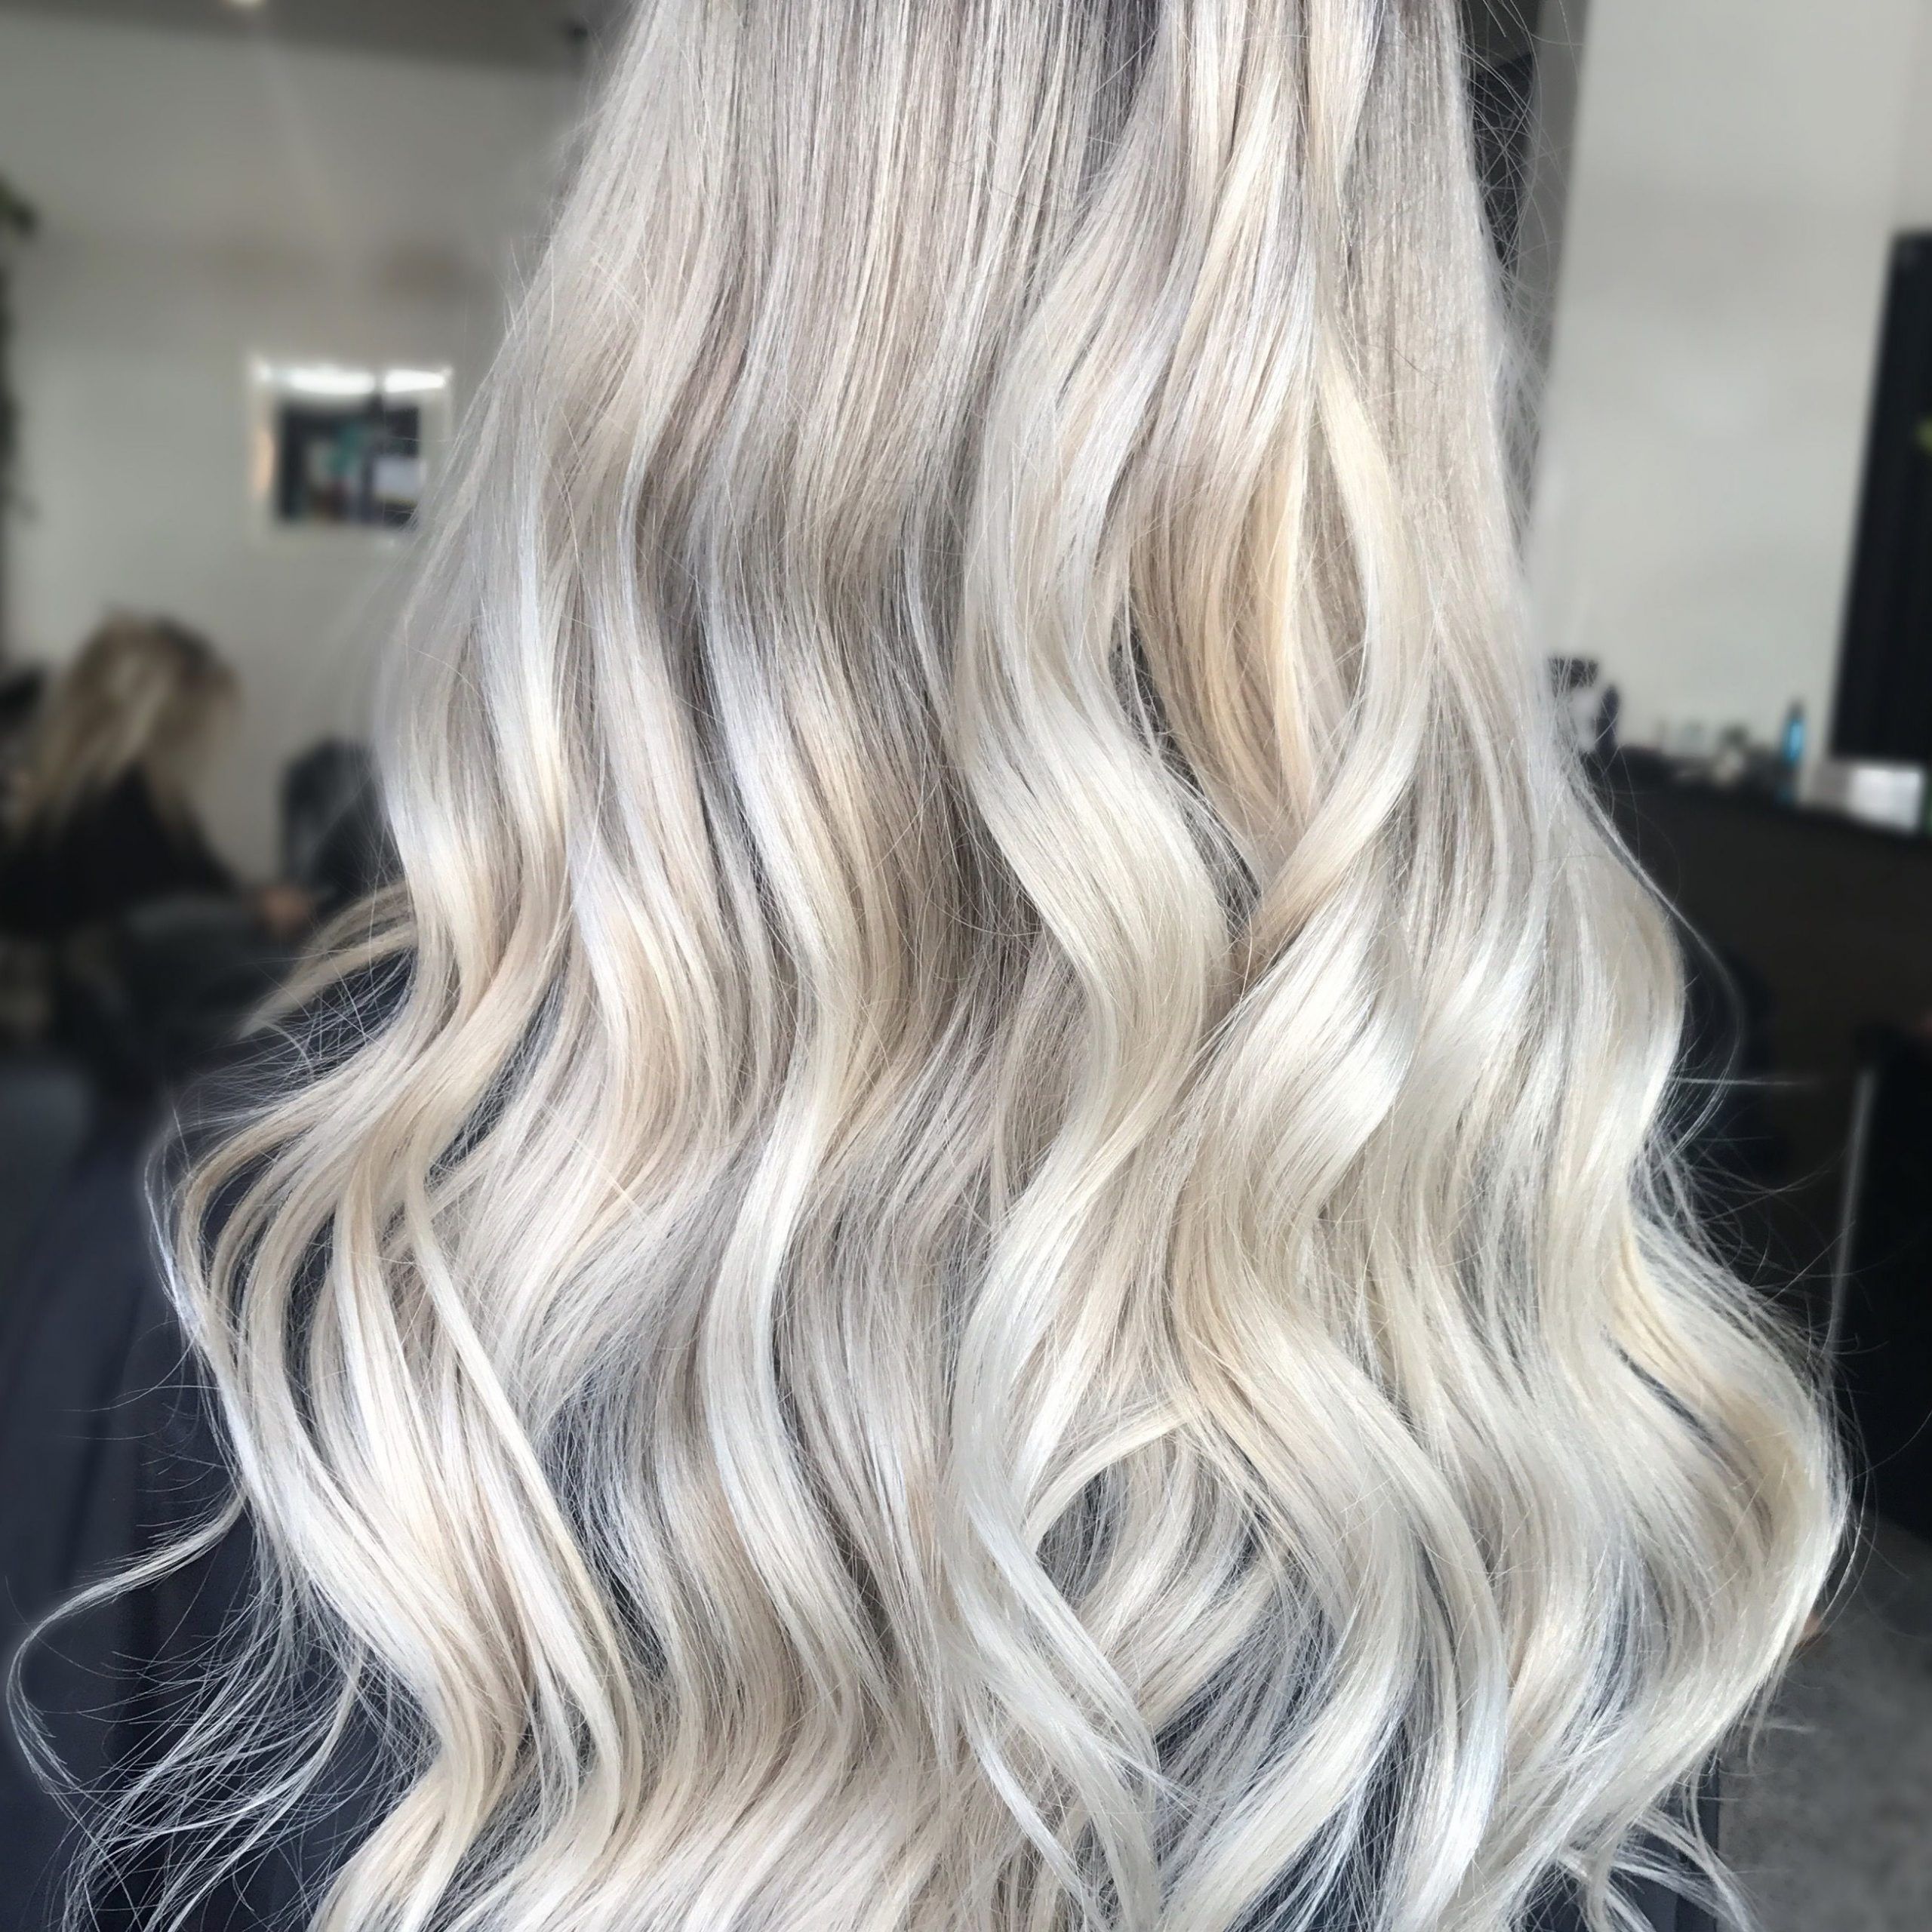 Well Known Blonde Balayage Ombre Hairstyles In Blonde Balayage, Long Hair, Cool Girl Hair ️ Lived In Hair (View 3 of 20)